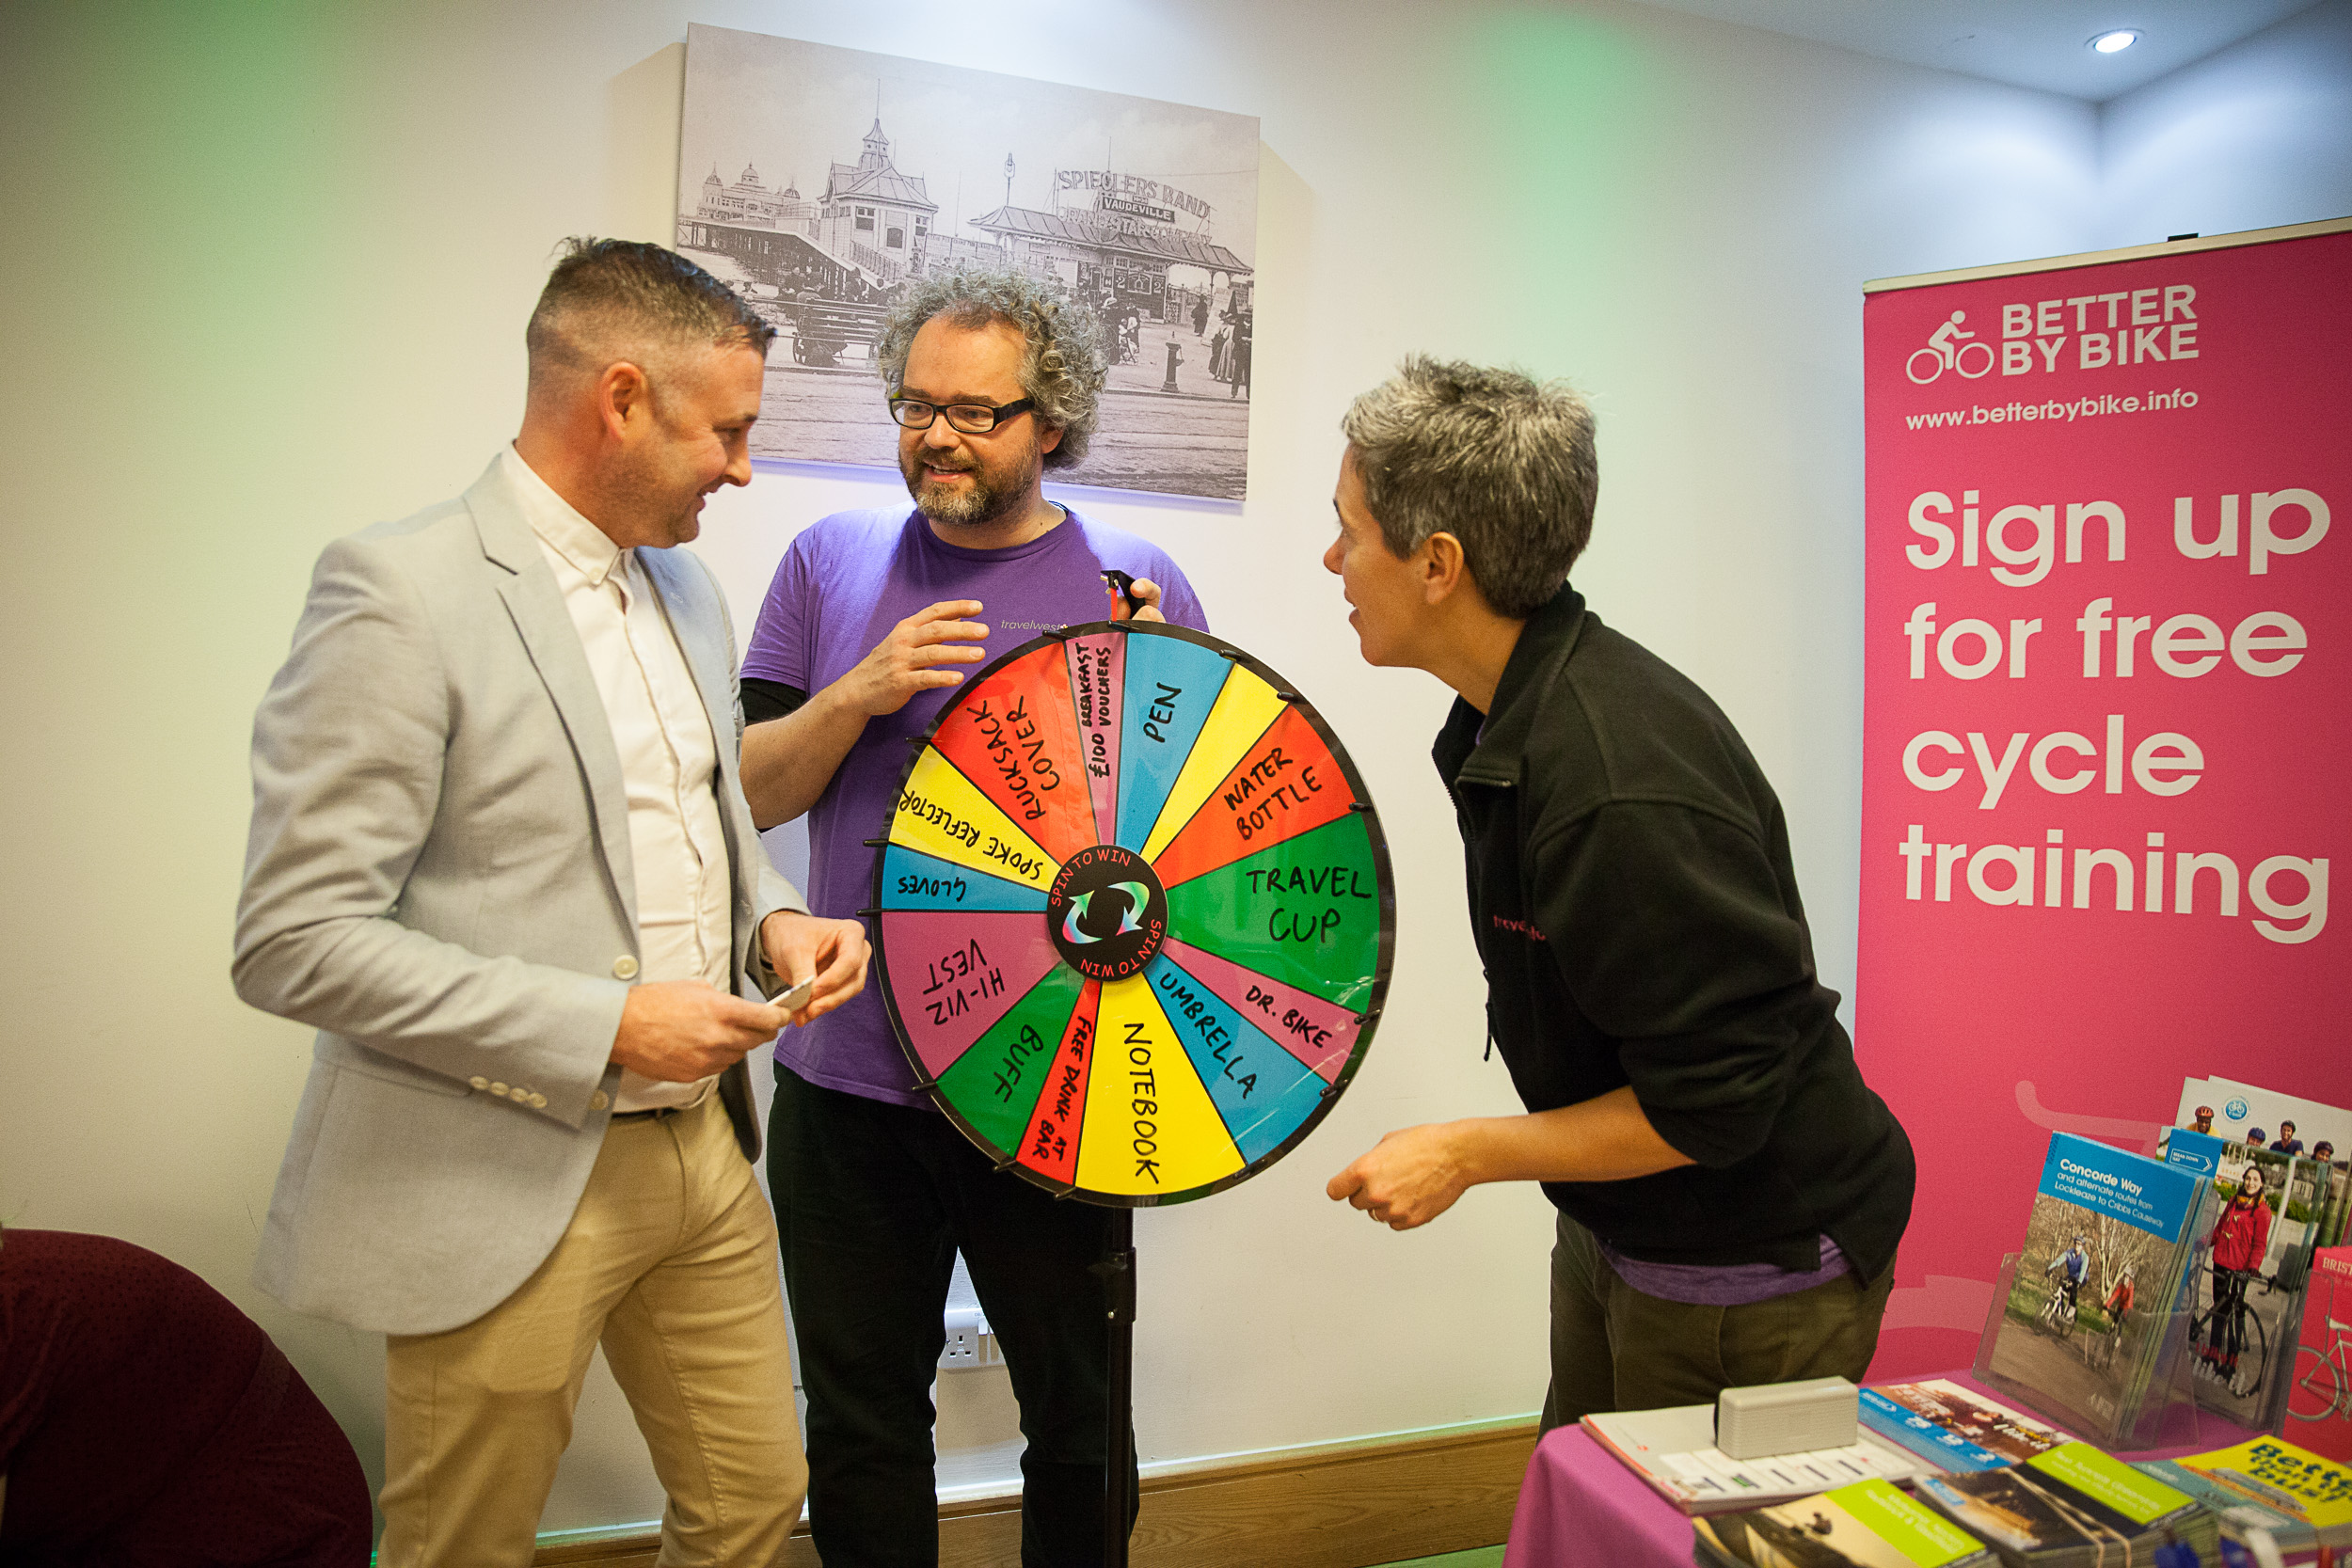 People talking and smiling at an engagement stall with a wheel of fortune game for sustainable prizes